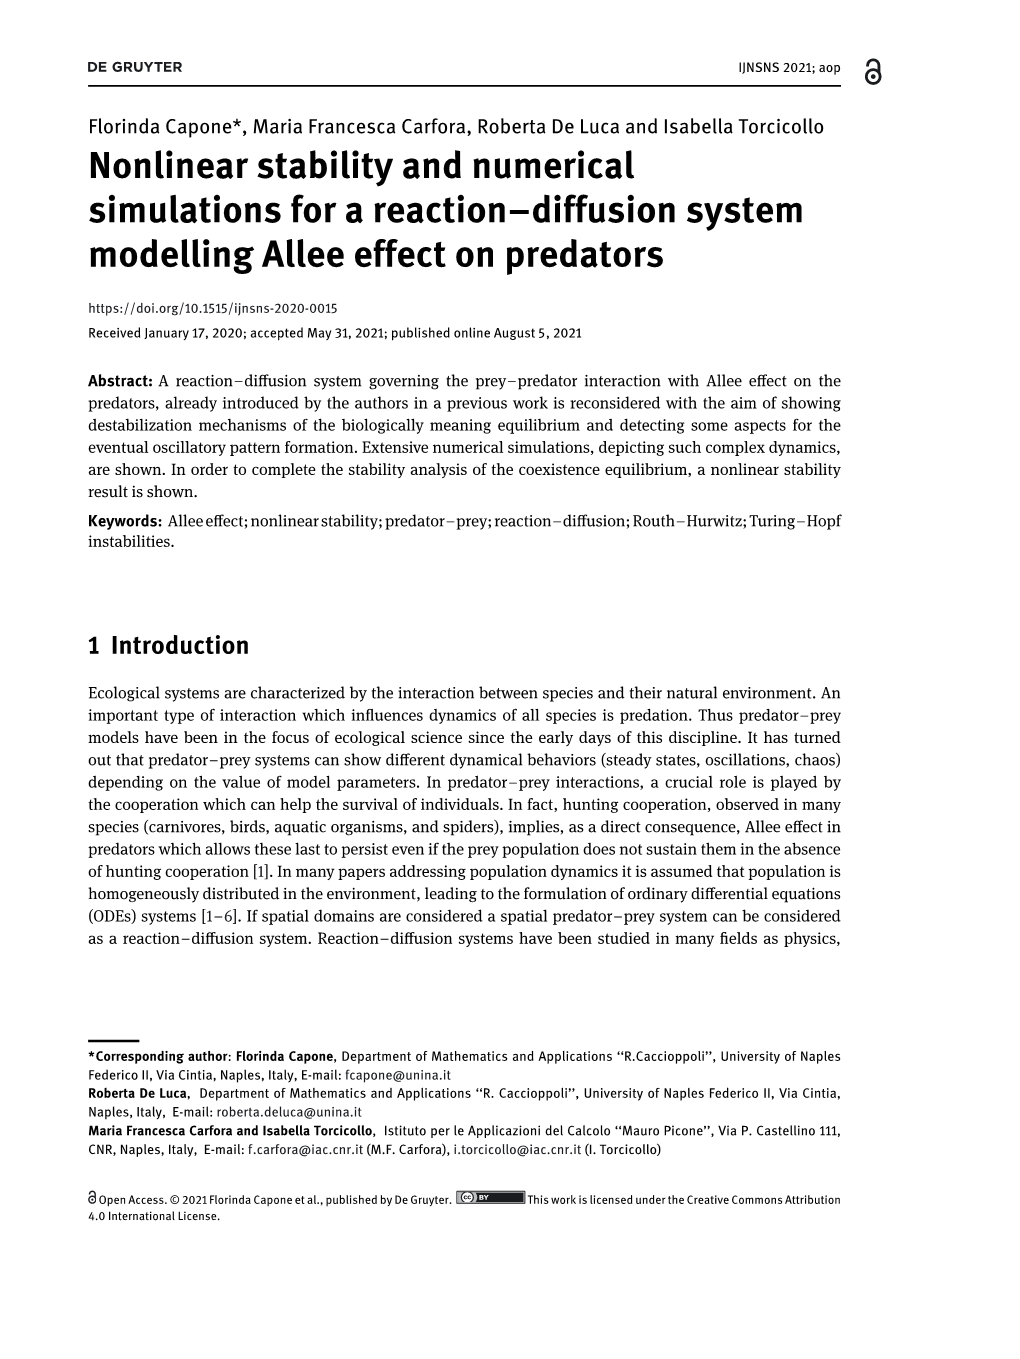 Nonlinear Stability and Numerical Simulations for a Reaction–Diffusion